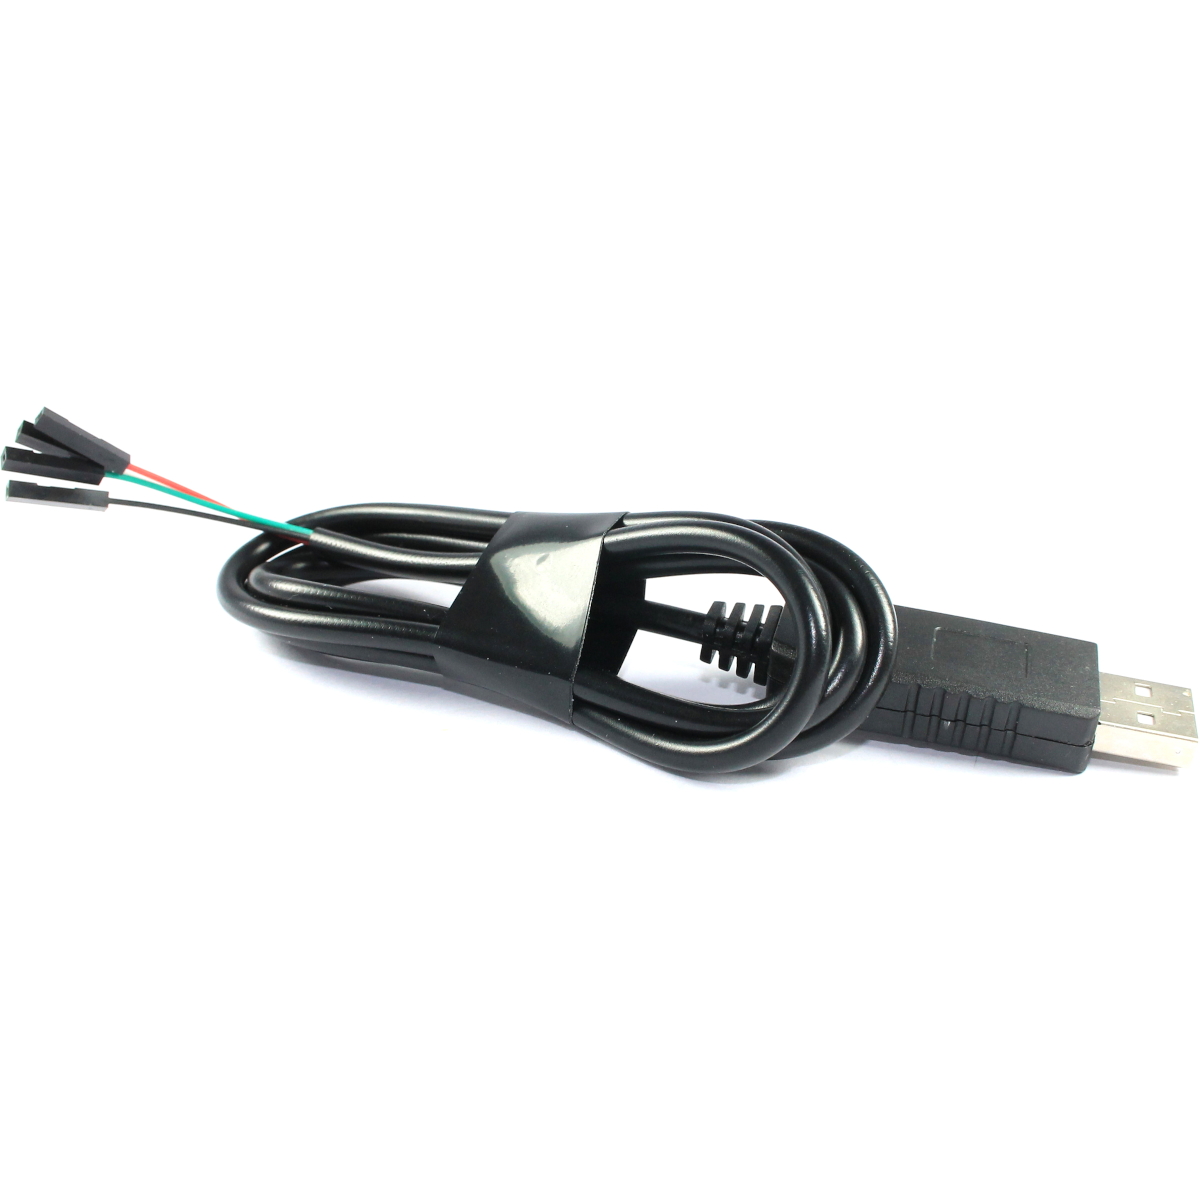 PL2303HX USB Transfer to TTL Serial Adapter Cable Image 1